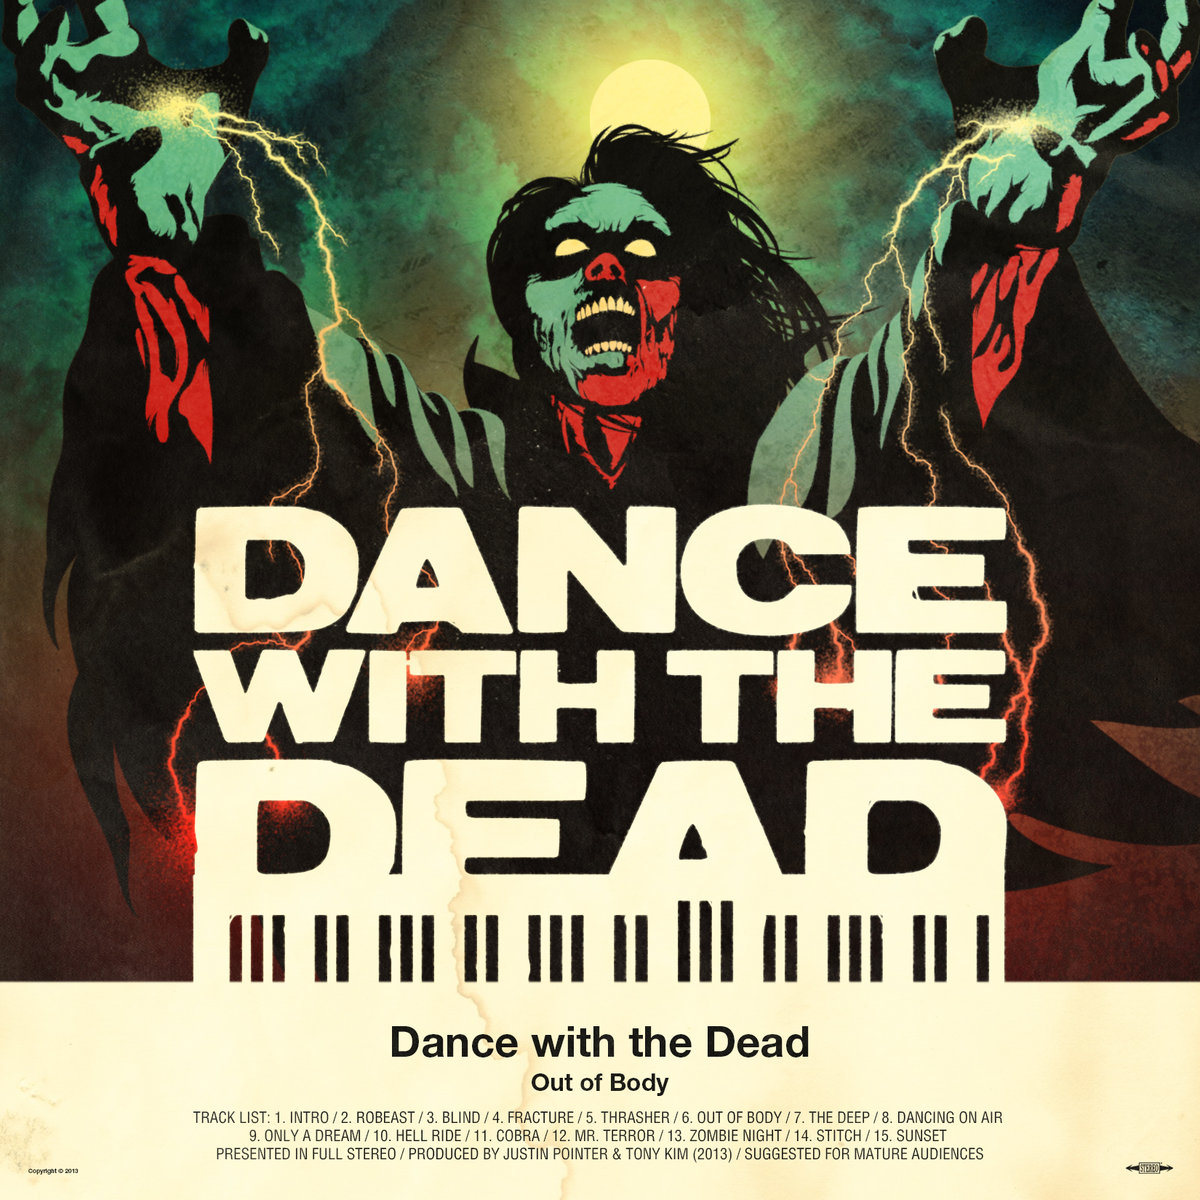 【GINGER掲載商品】 Dance of the dead 2枚セット④ ecousarecycling.com